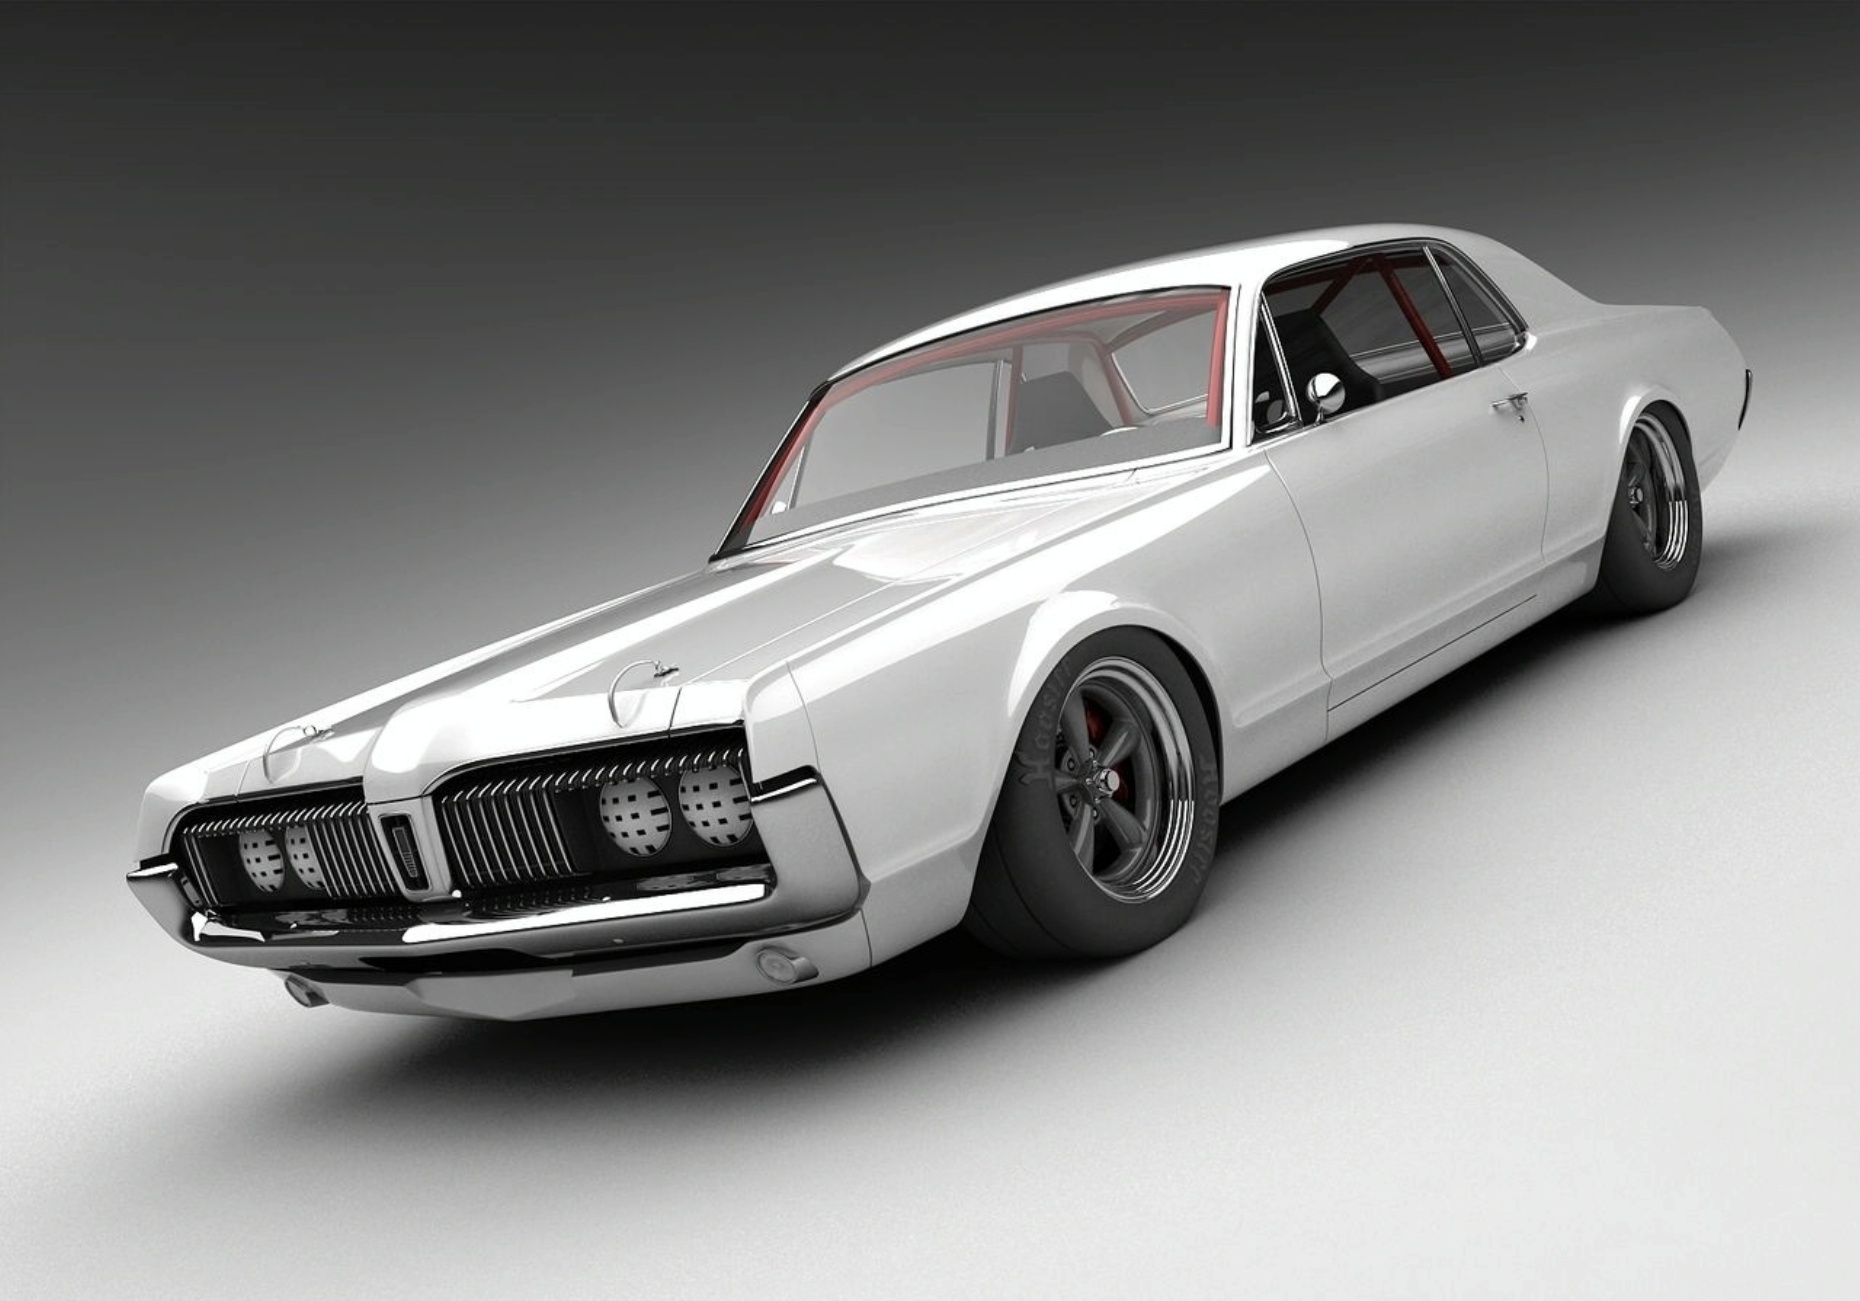 Mercury Cougar Muscle Classic Hot Rod Rods Wallpaper Background